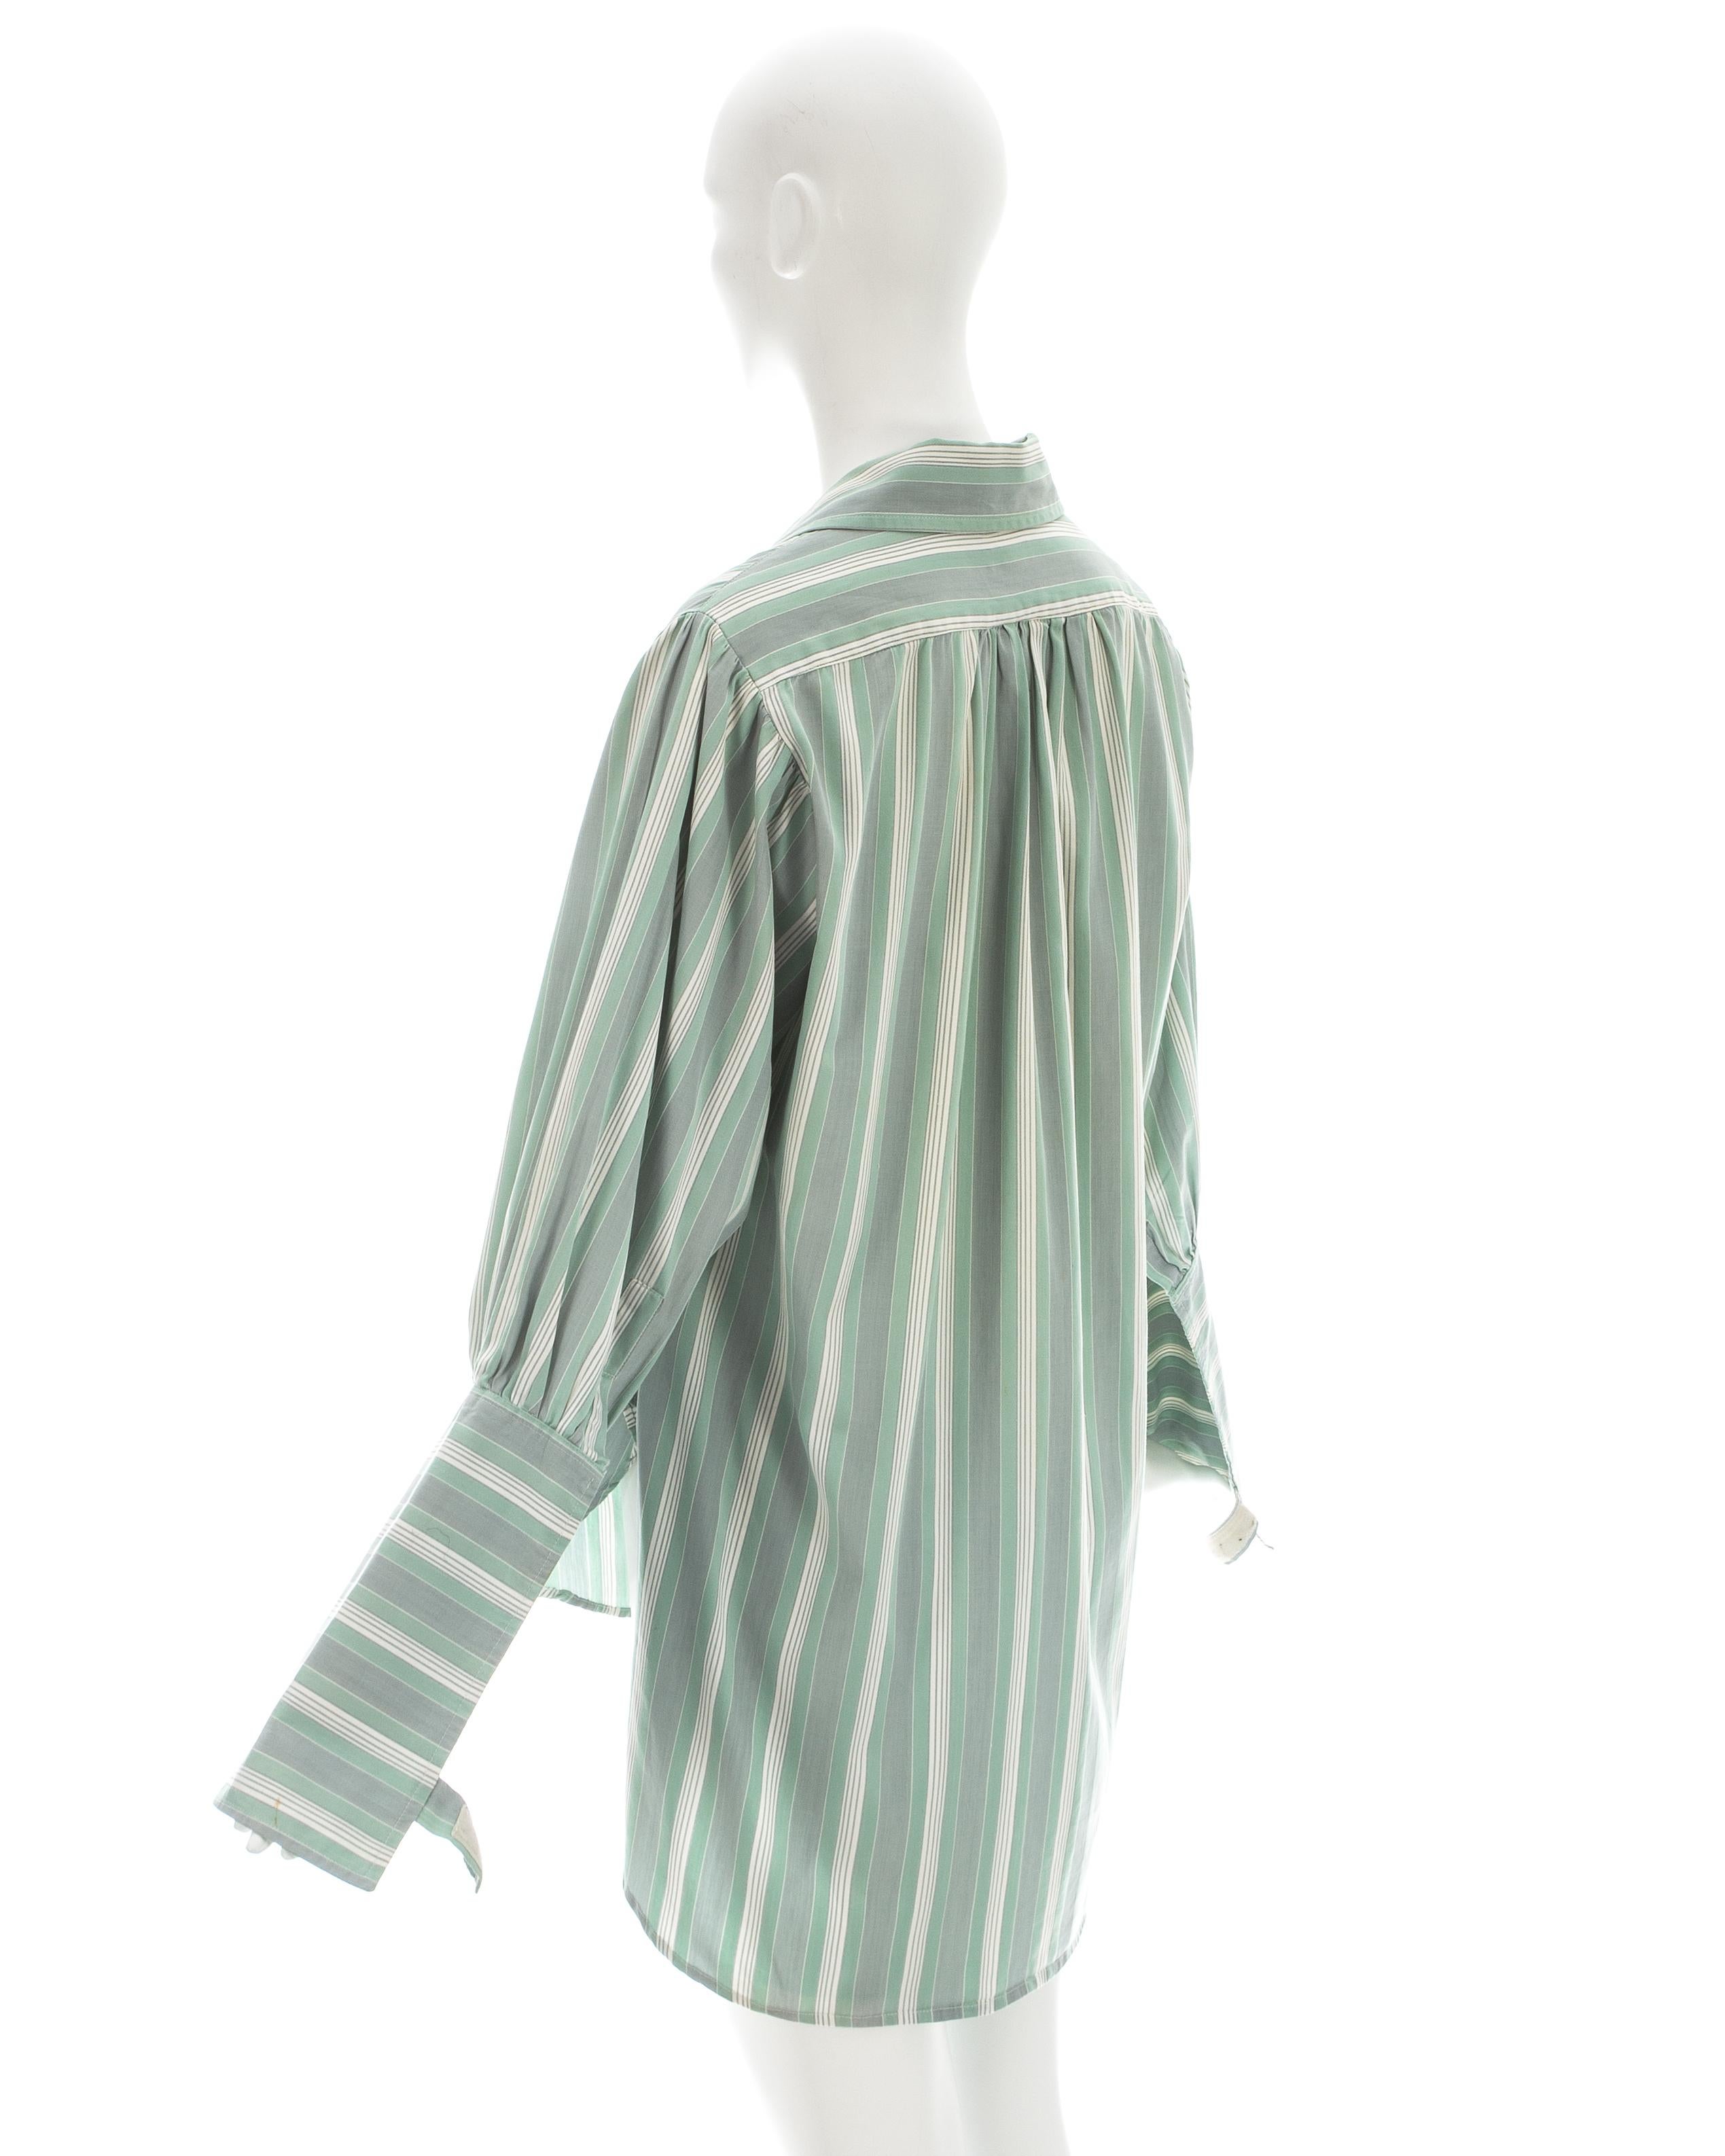 Vivienne Westwood / Malcolm McLaren striped cotton oversized shirt, ss 1983 In Good Condition For Sale In London, London